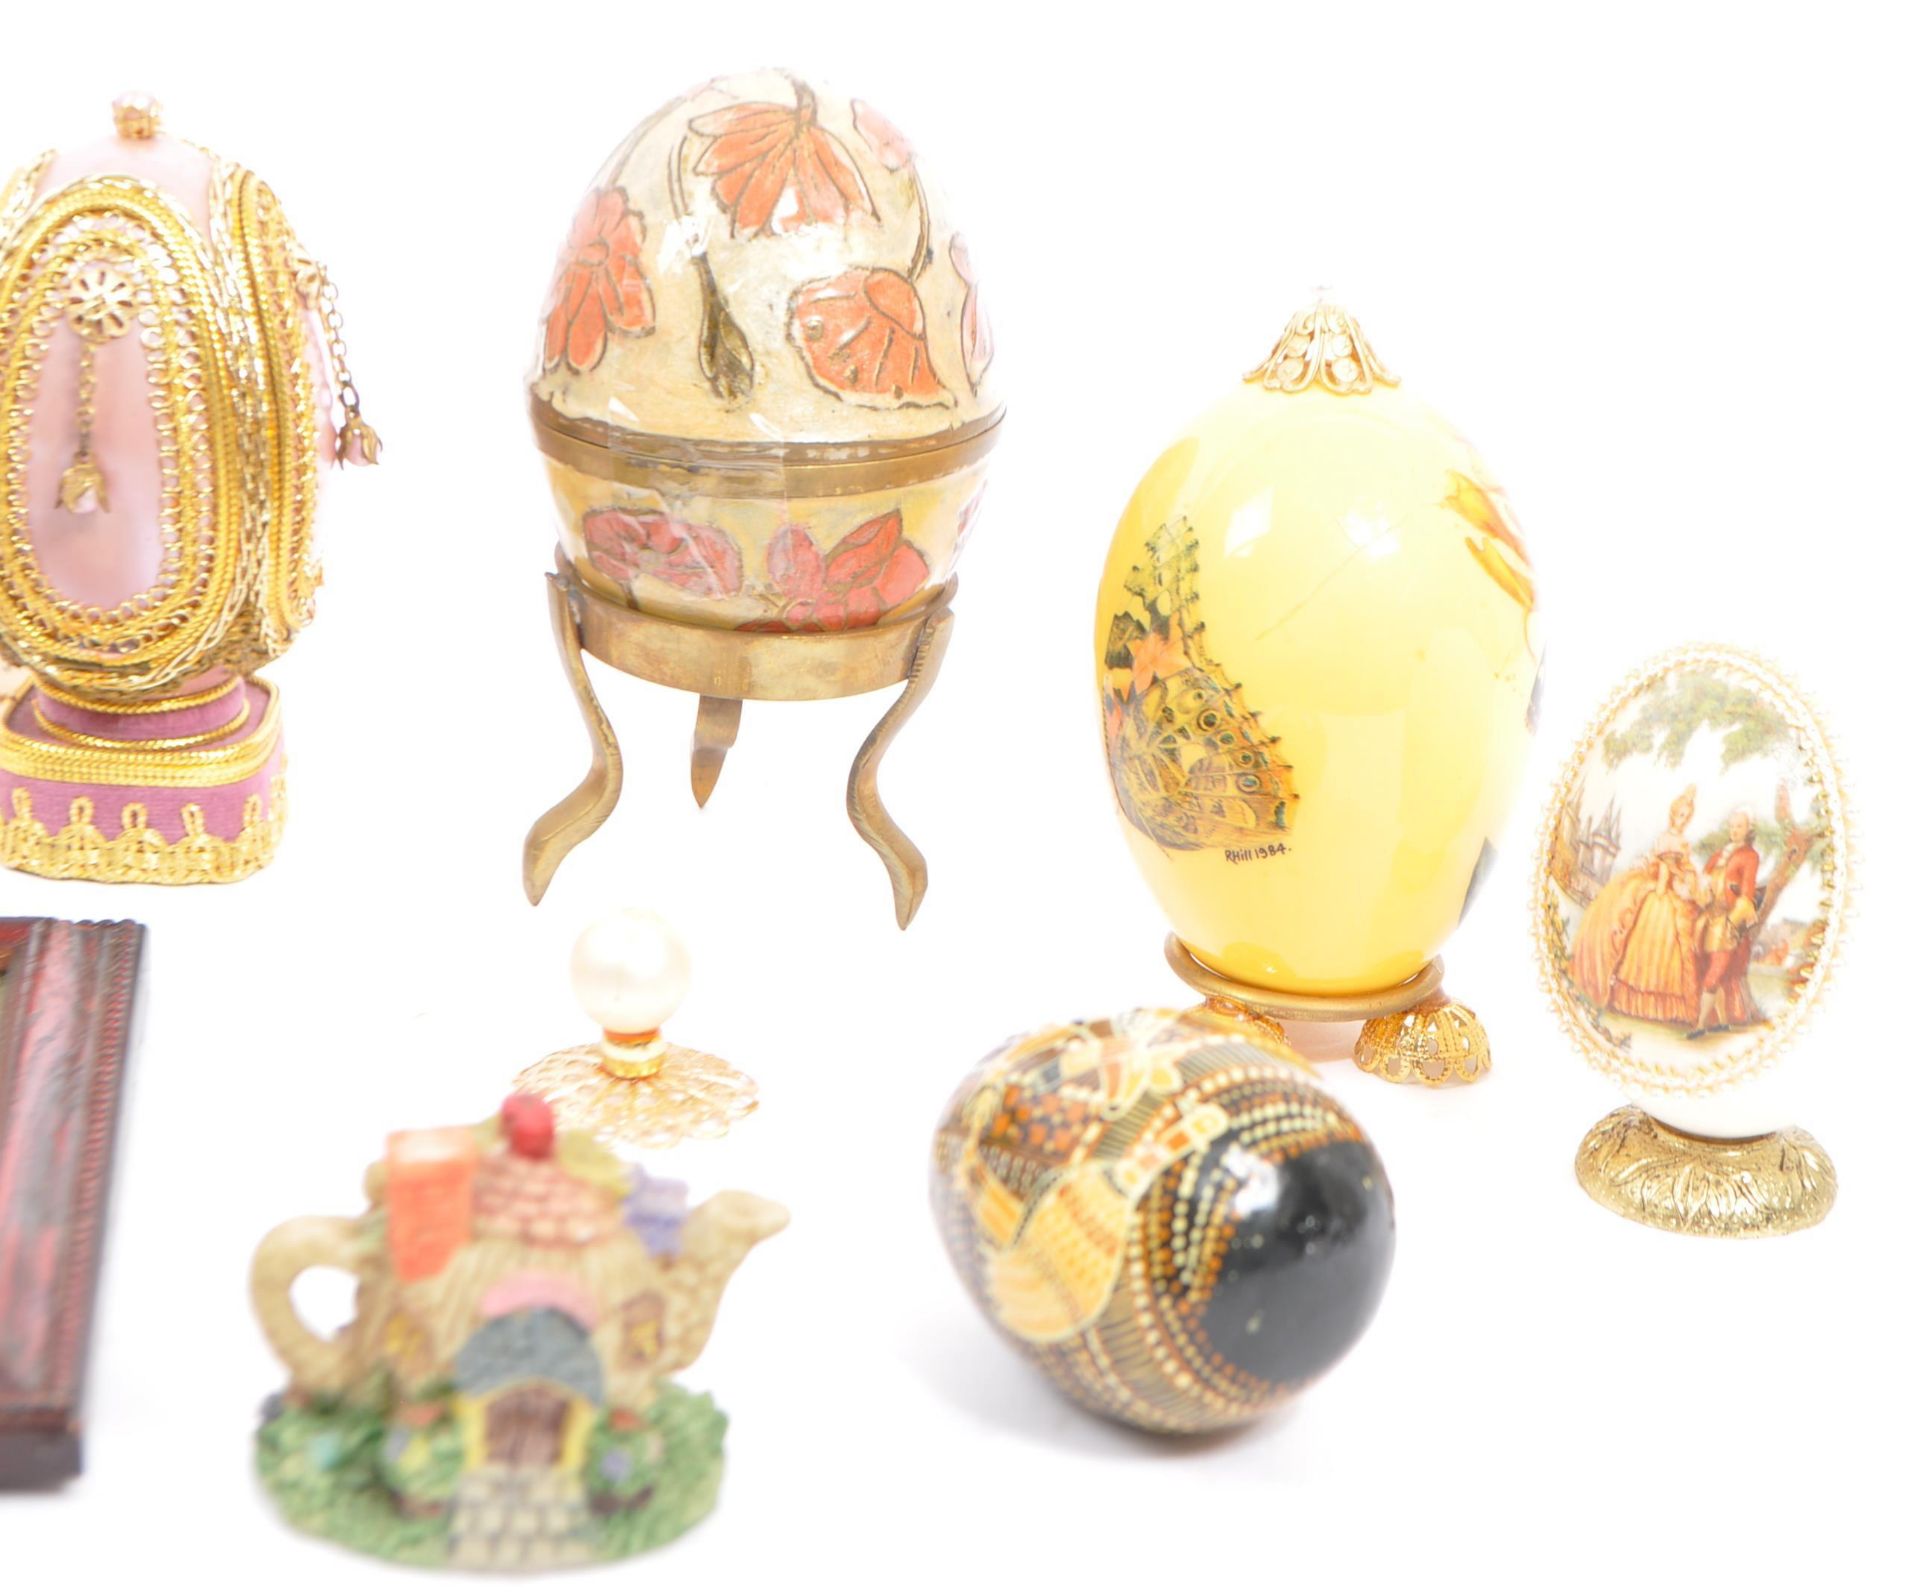 COLLECTION OF TWELVE VINTAGE 20TH CENTURY DECORATIVE EGGS - Image 4 of 8